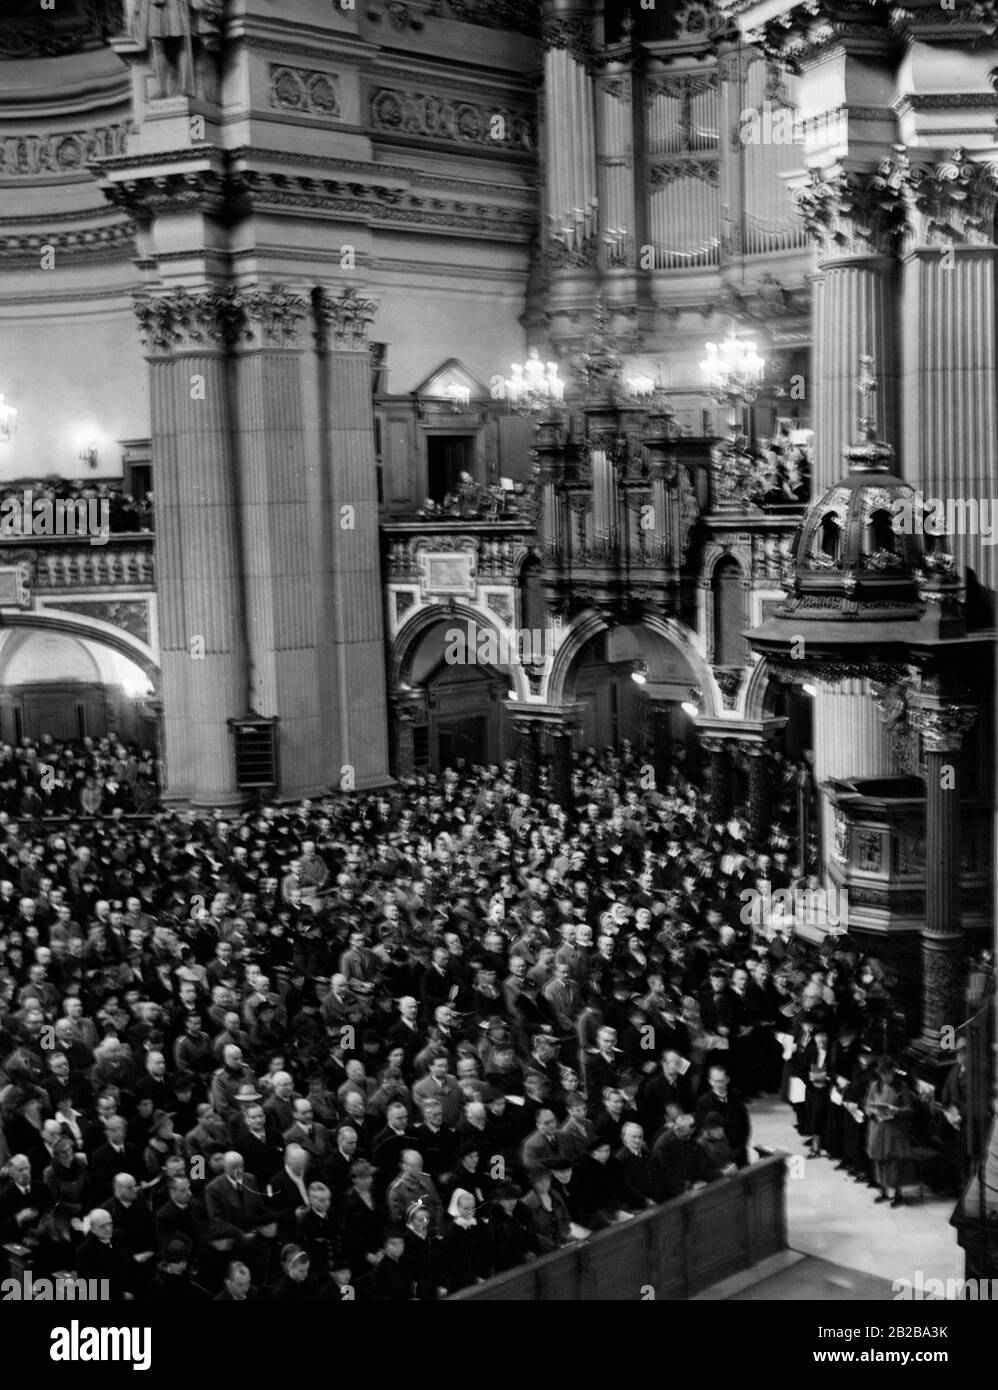 Memorial service of the German Evangelical Church in Berlin on 08.10.1939 on the occasion of the victorious Polish campaign. Stock Photo